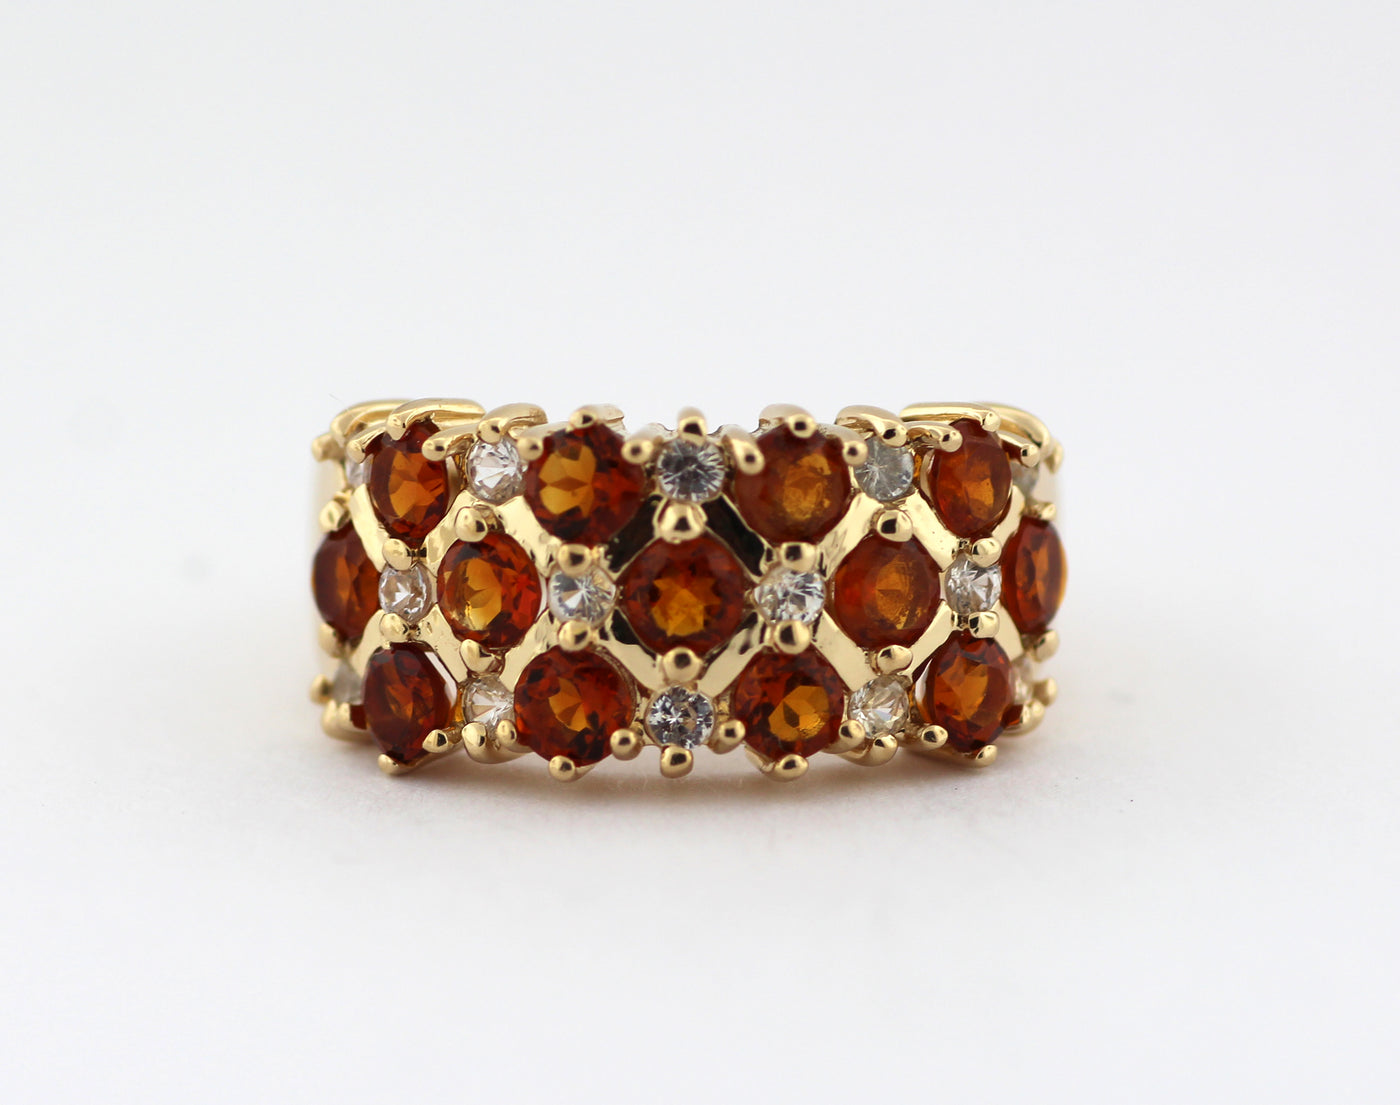 ESTATE 14KY 1.30 CTTW CITRINE AND .70 CTTW WHITE SAPPHIRE RING